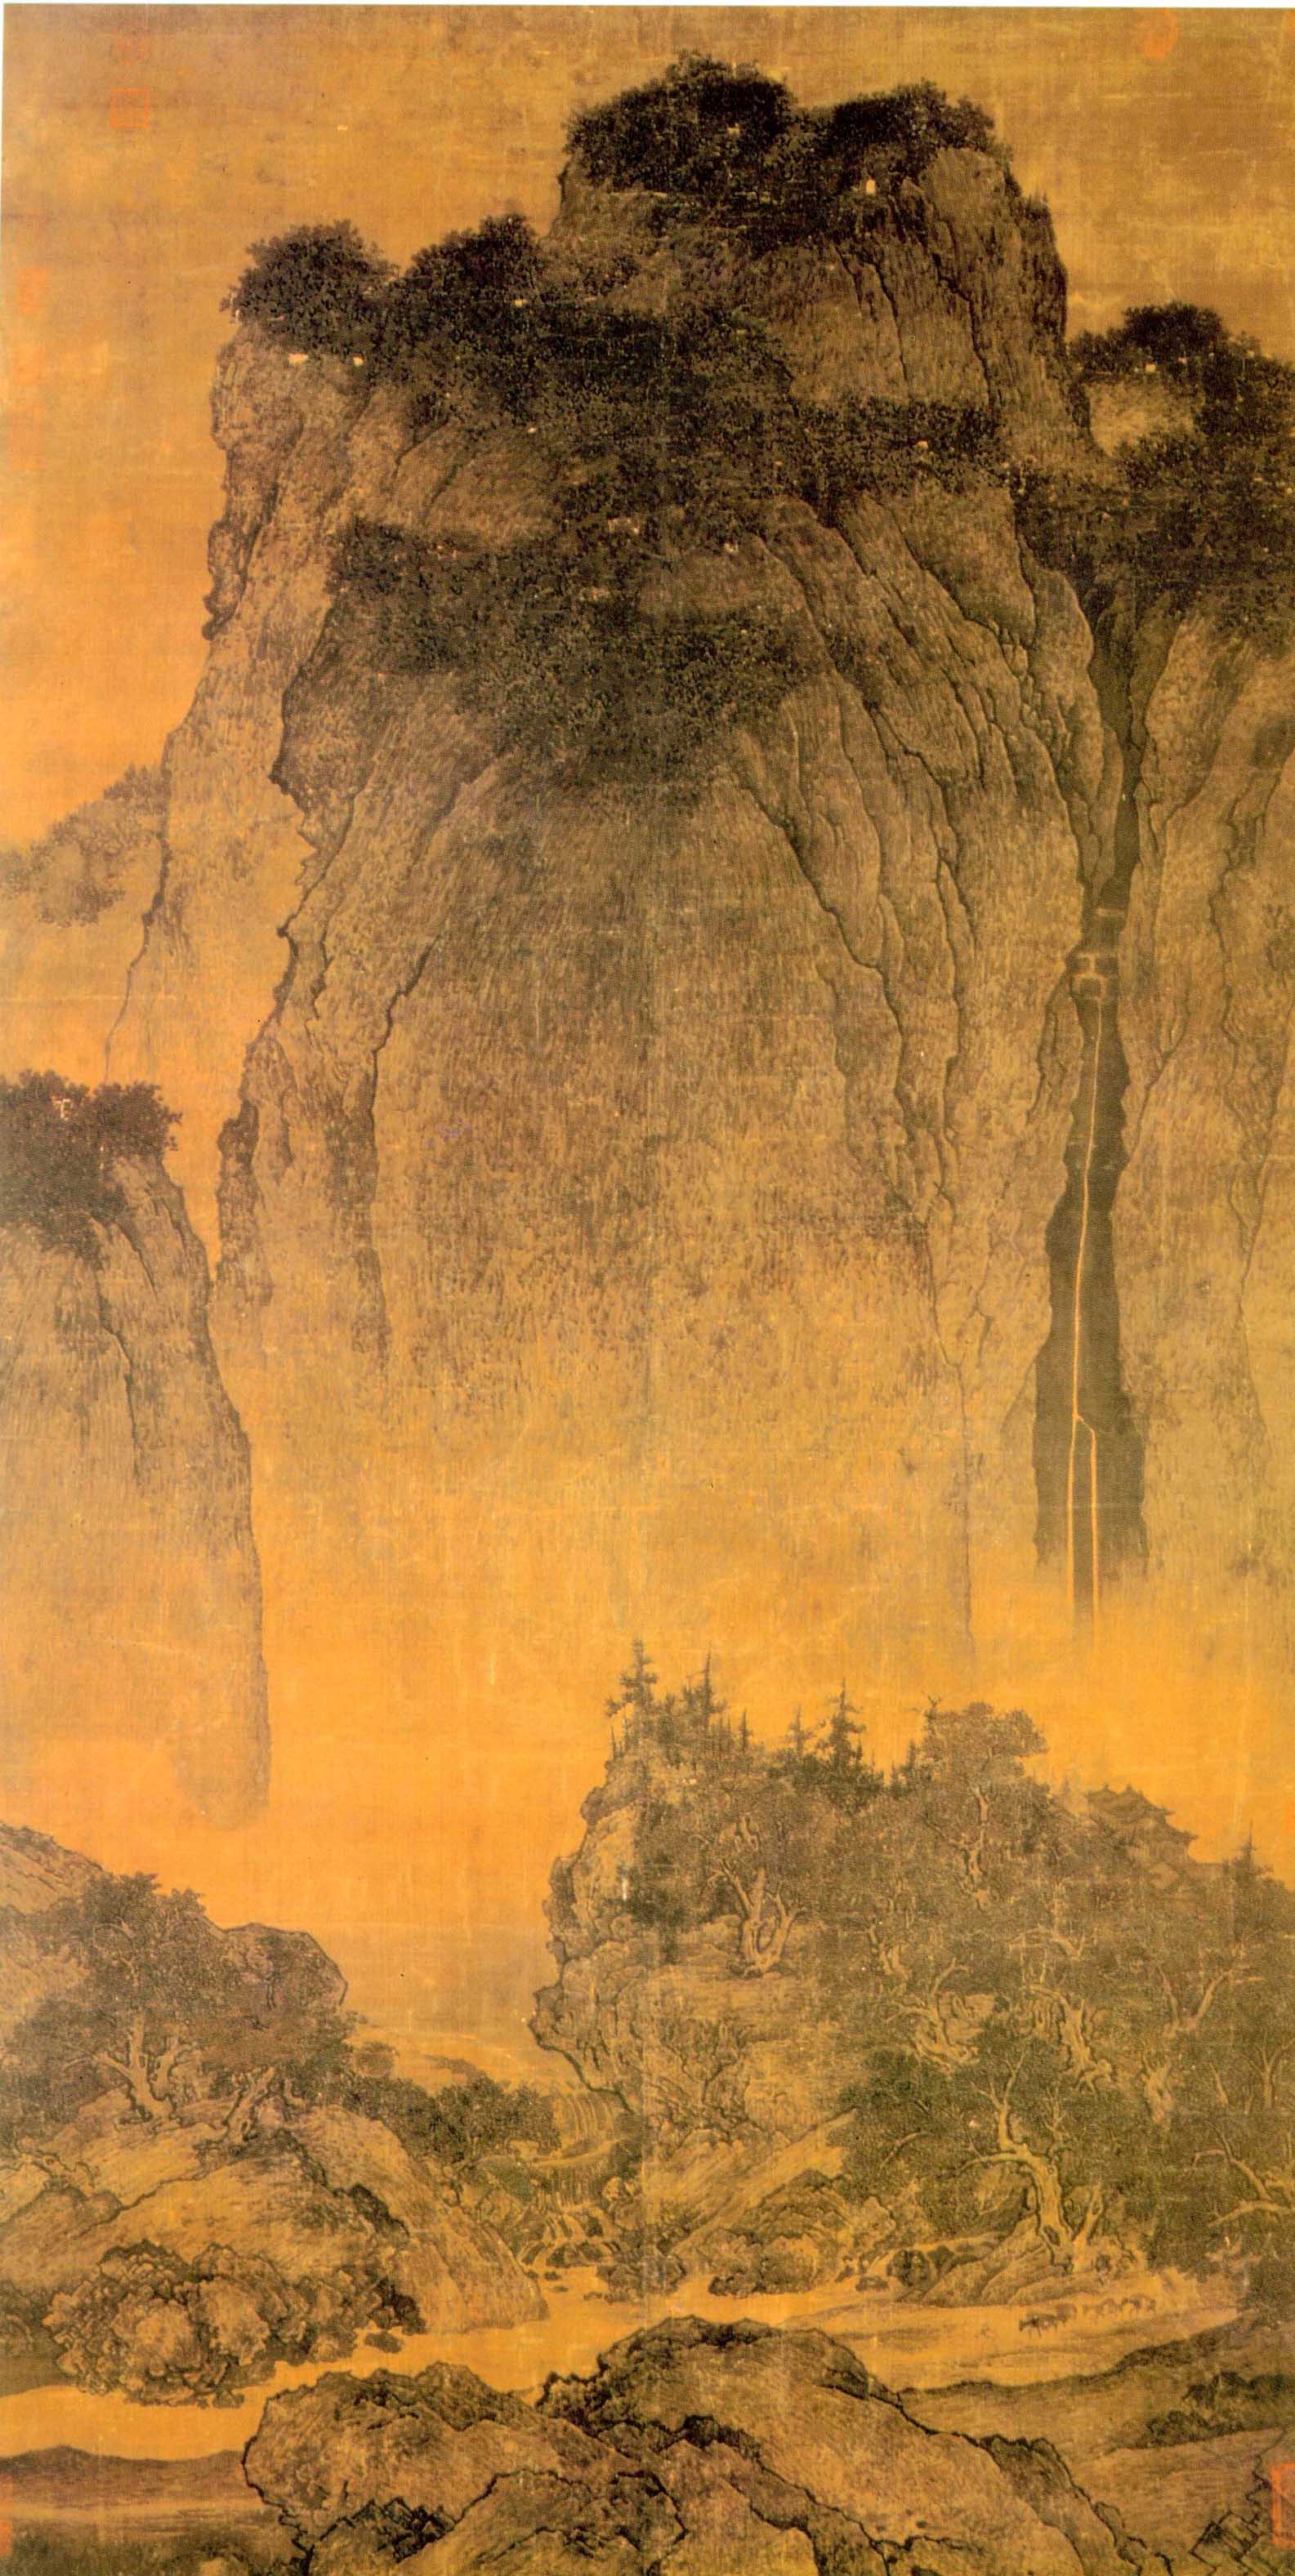 "The Golden Era of Chinese Painting" Sung Dynasty (960-1179)